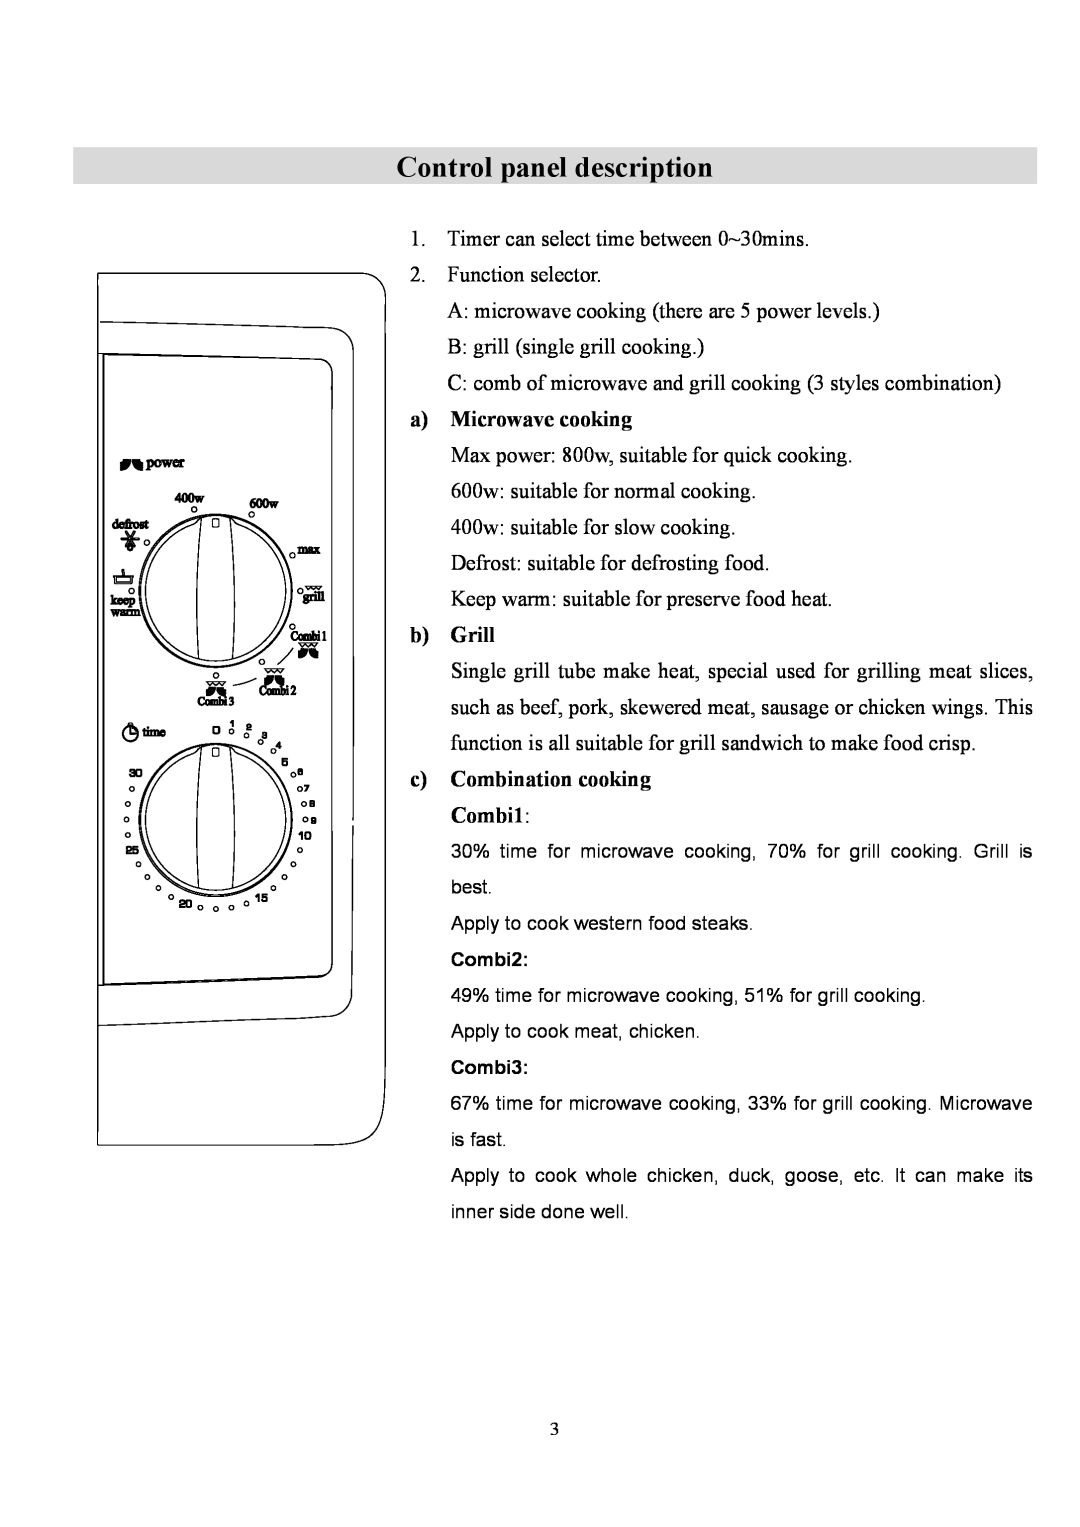 Whirlpool MWO 605 manual Control panel description, a Microwave cooking, b Grill, c Combination cooking Combi1 